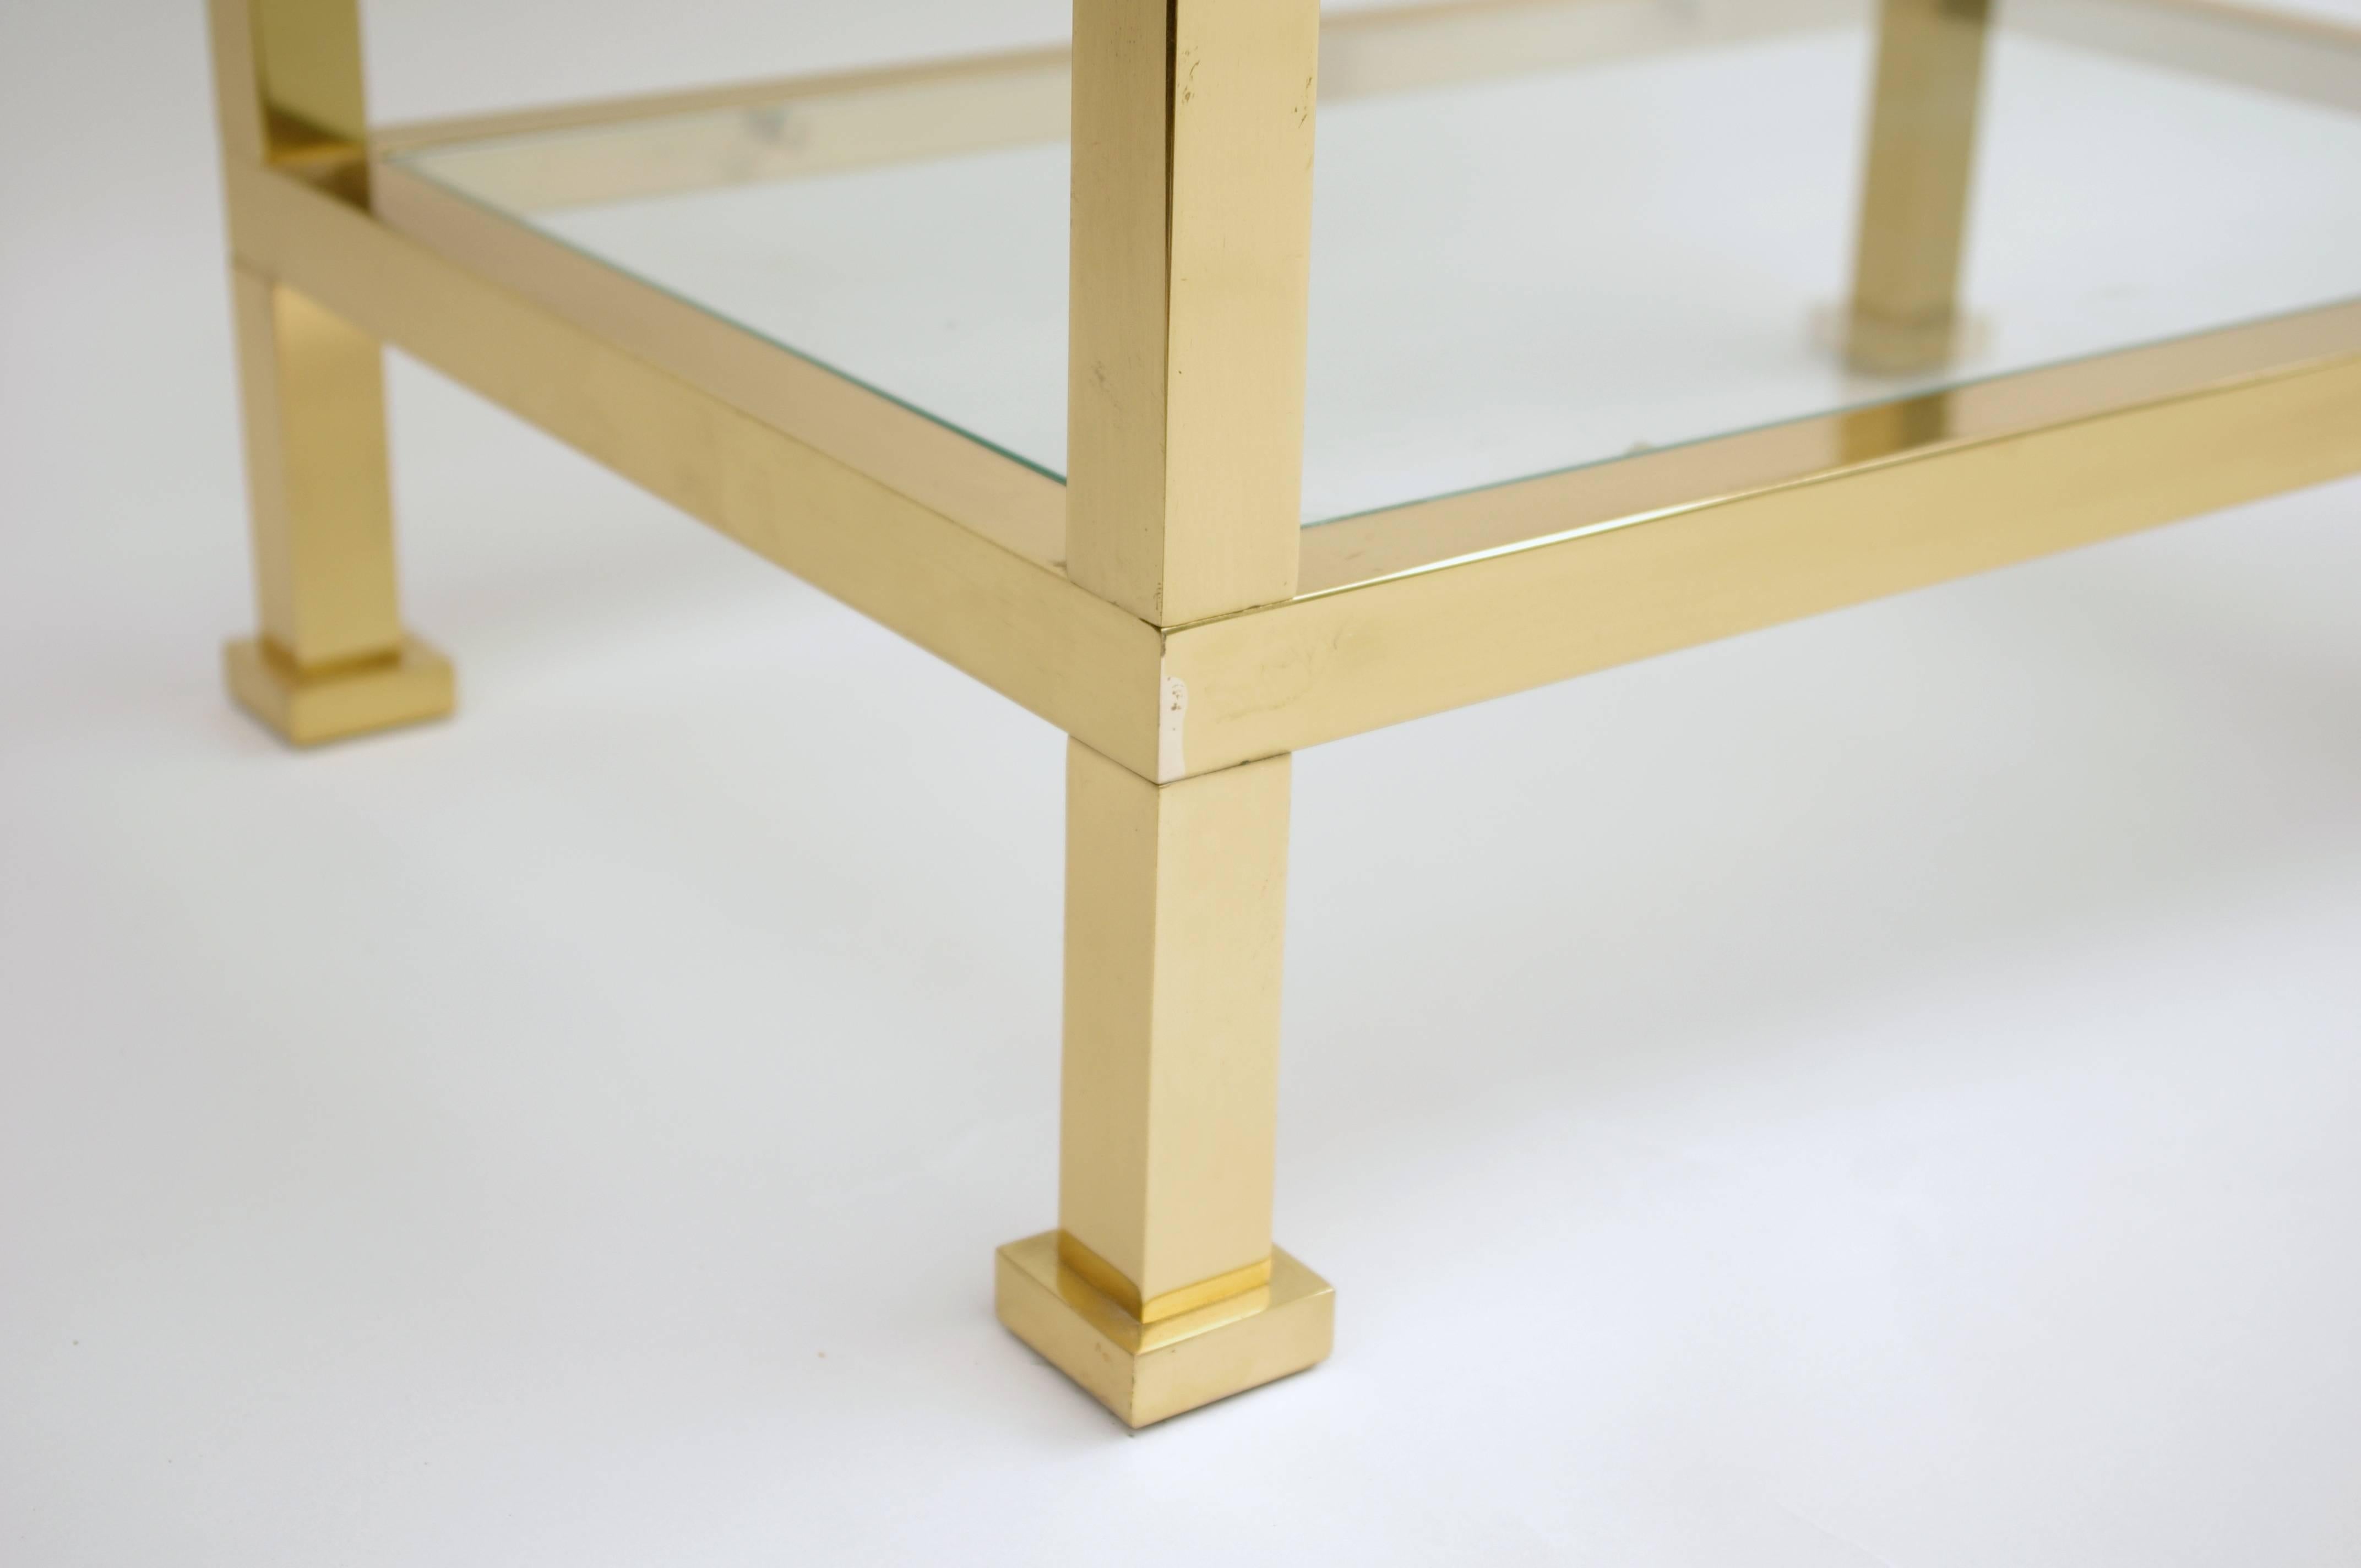 Gilt bronze side table with three glass trays in the style of Guy Lefèvre for the Maison Jansen.

Work from the 1970’s.